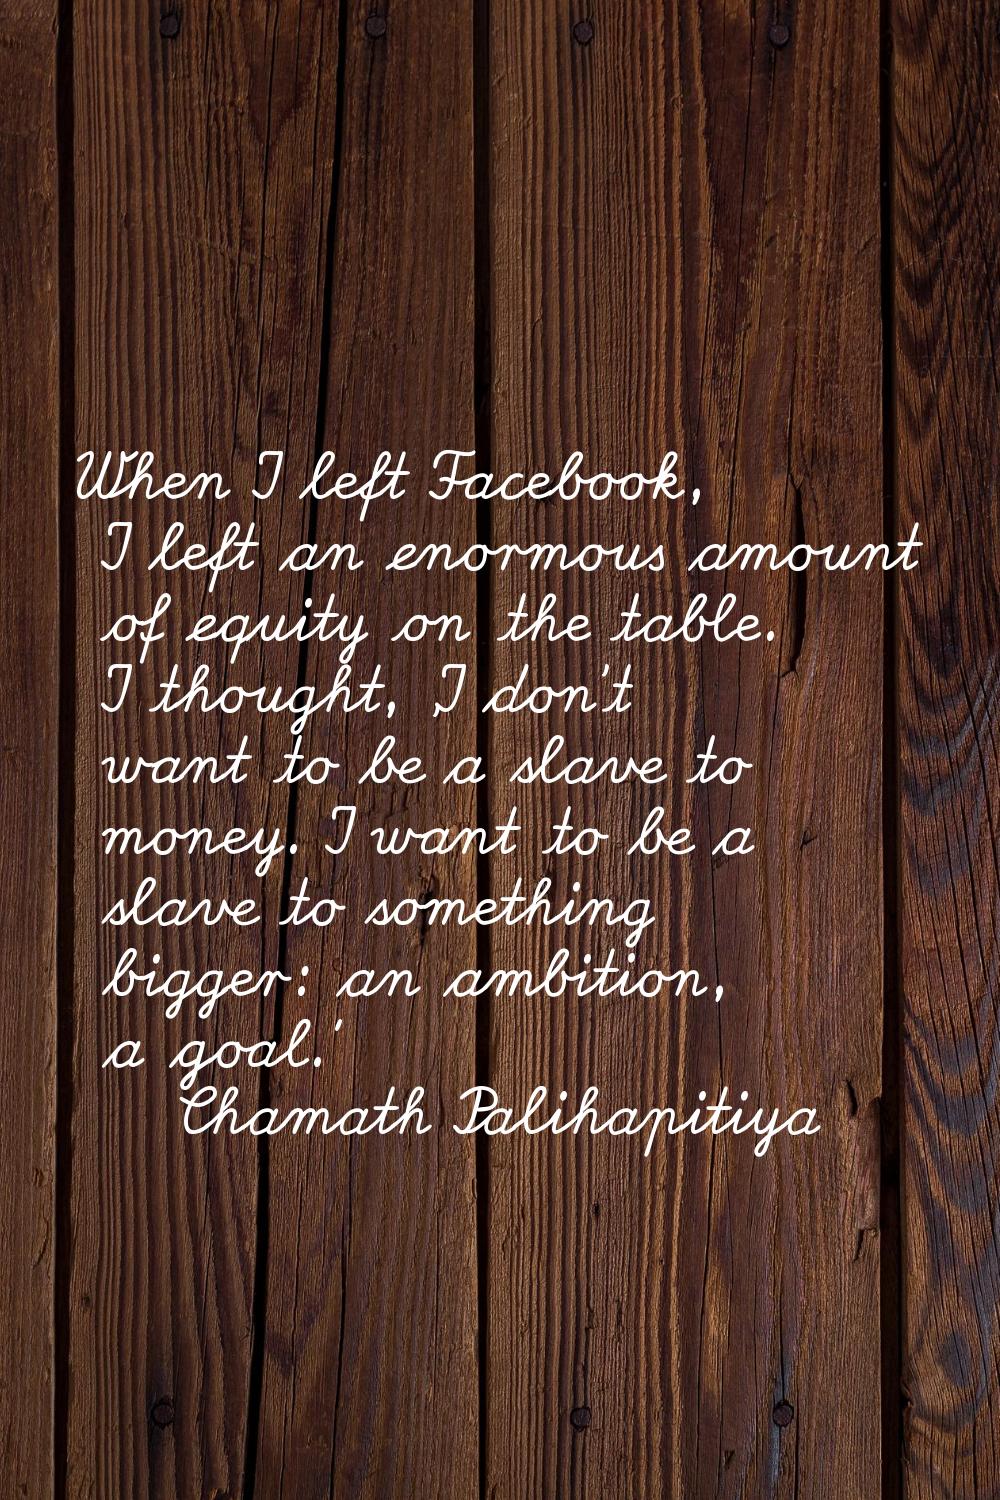 When I left Facebook, I left an enormous amount of equity on the table. I thought, 'I don't want to